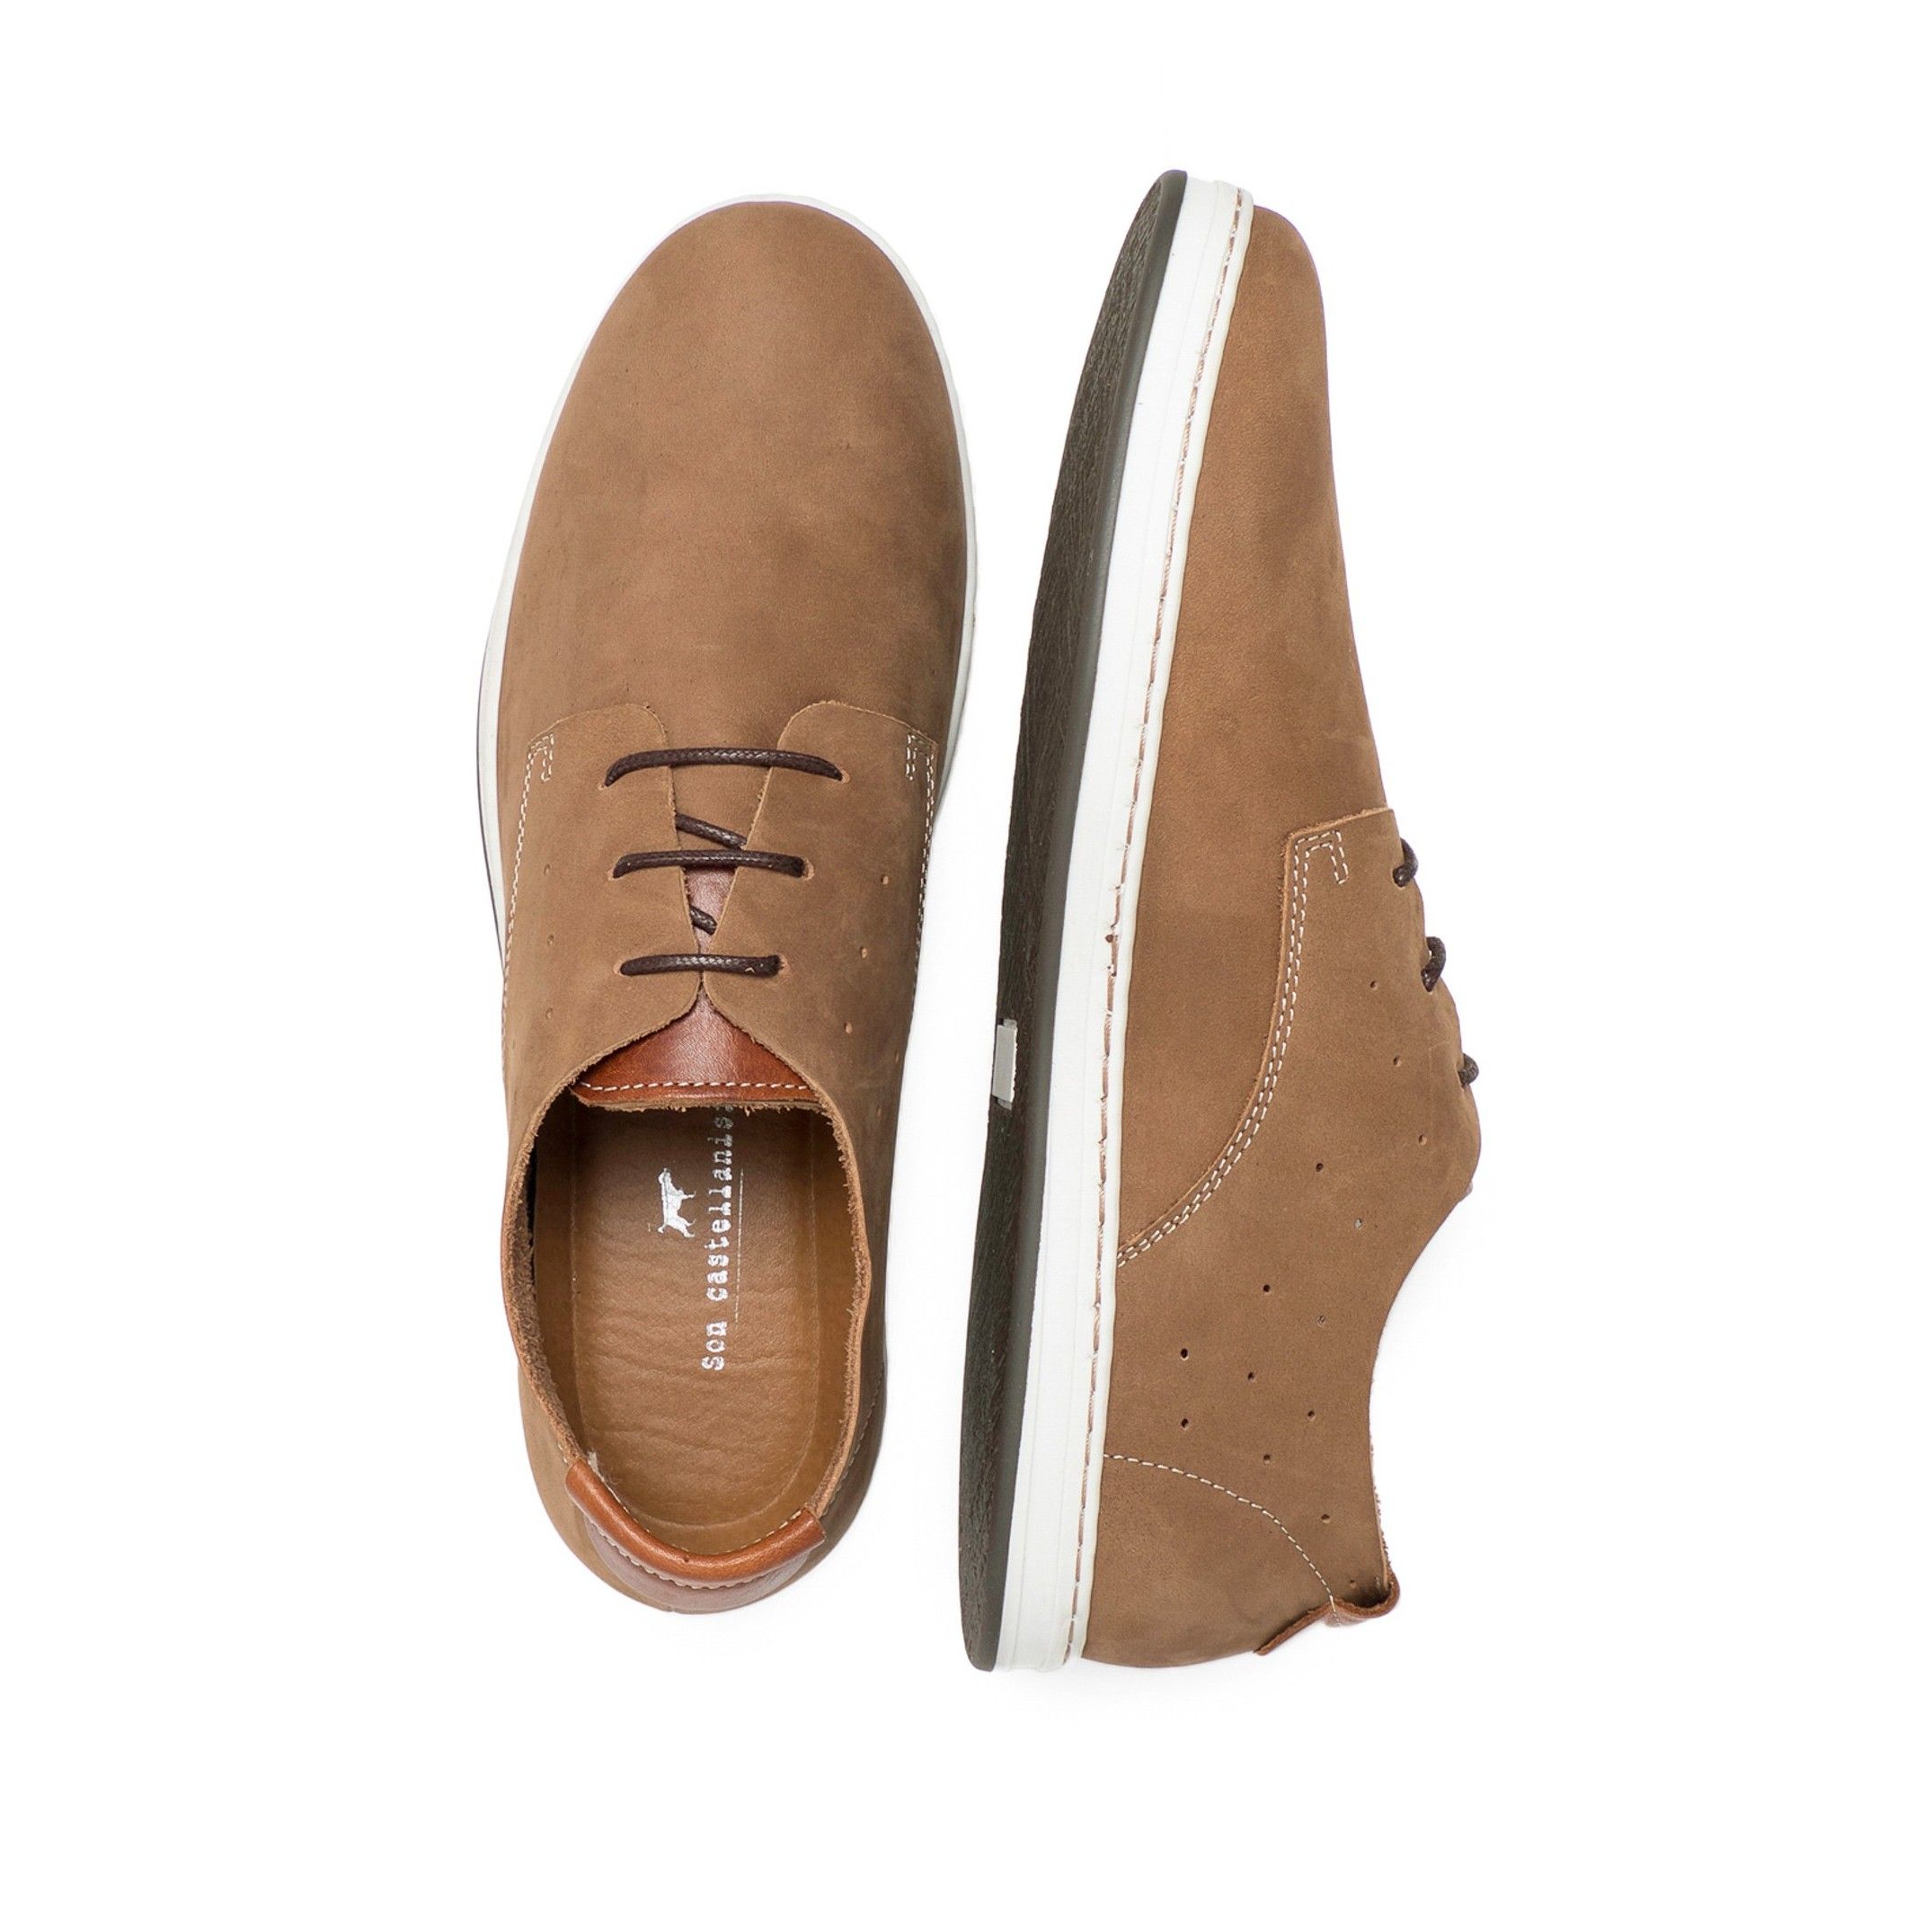 Leather boat shoes, by Son Castellanisimos. Upper made of cowhide leather. Leather Laces closure. Inner and insole made of cowhide leather. Sole material: synthetic and non-slip. Heel height: 2 cm. Designed and made in Spain.